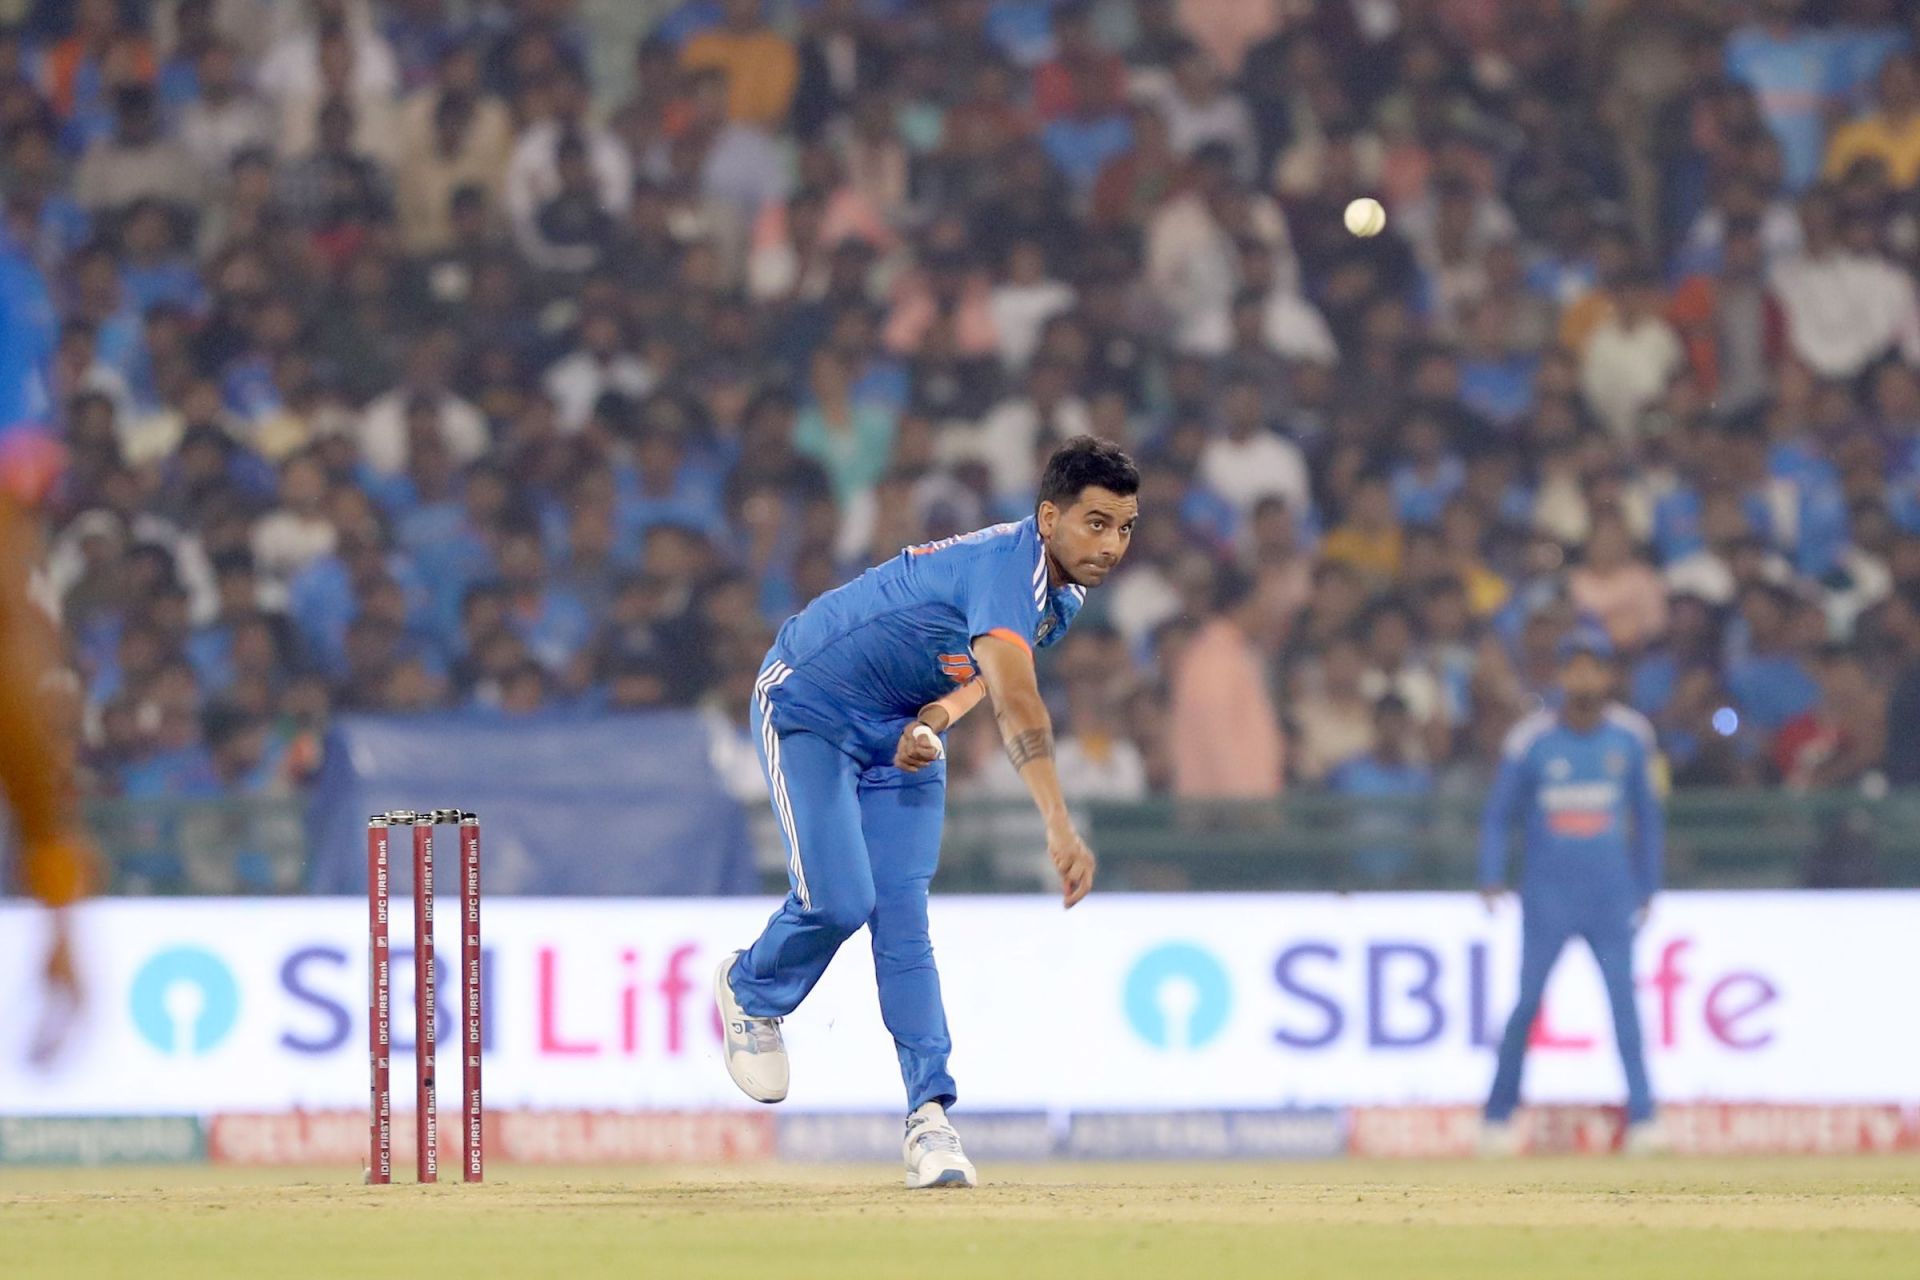 Deepak Chahar conceded 22 runs in his second over in the fourth T20I. [P/C: BCCI]